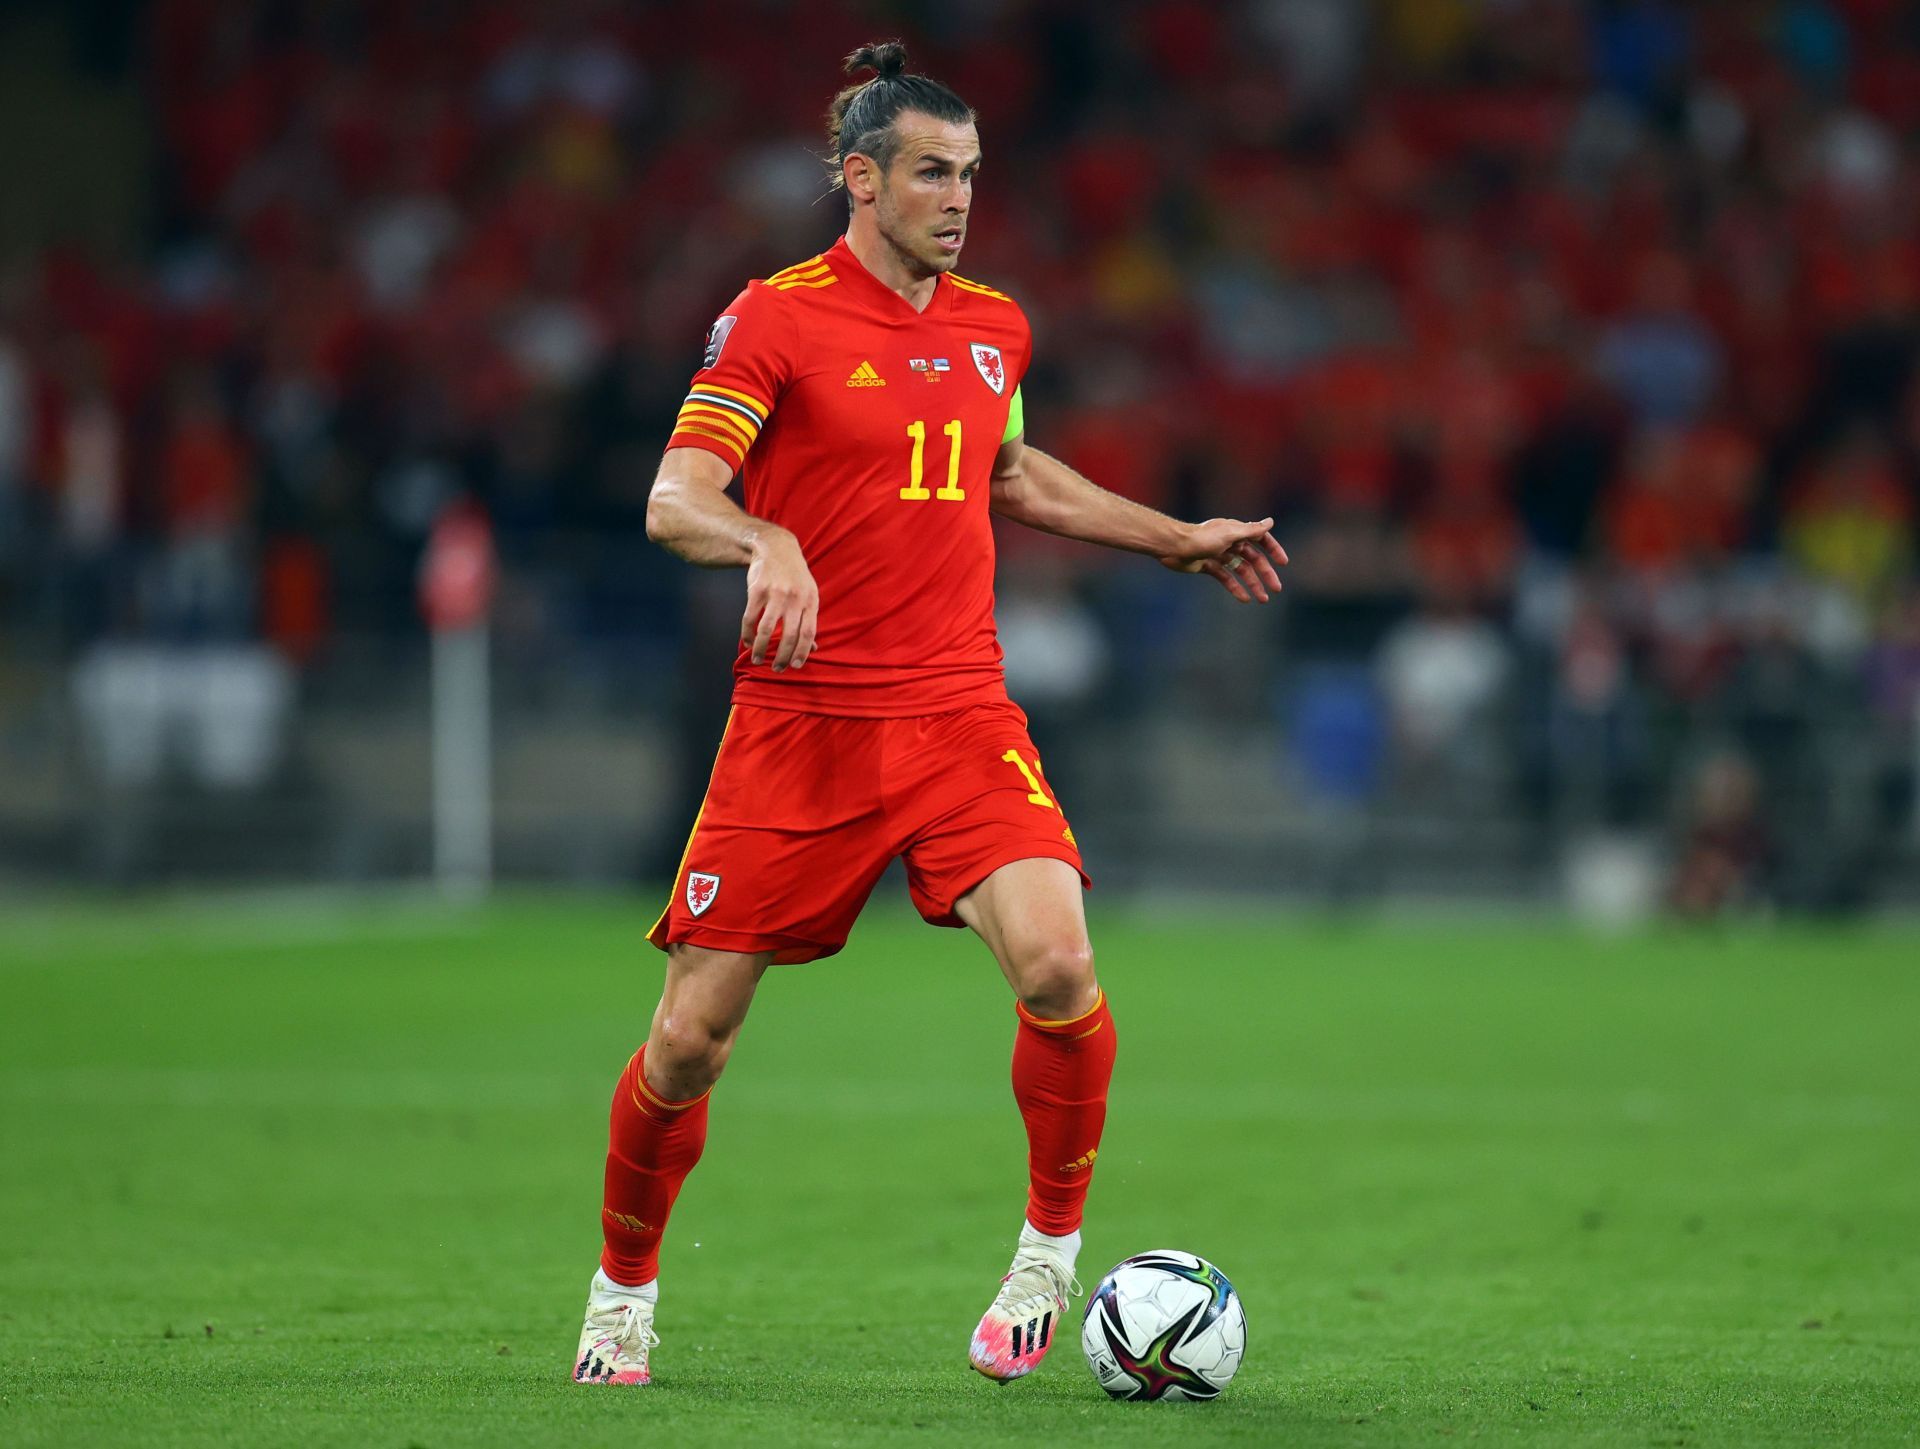 Arsenal have proposed a swap deal with Real Madrid involving Gareth Bale.